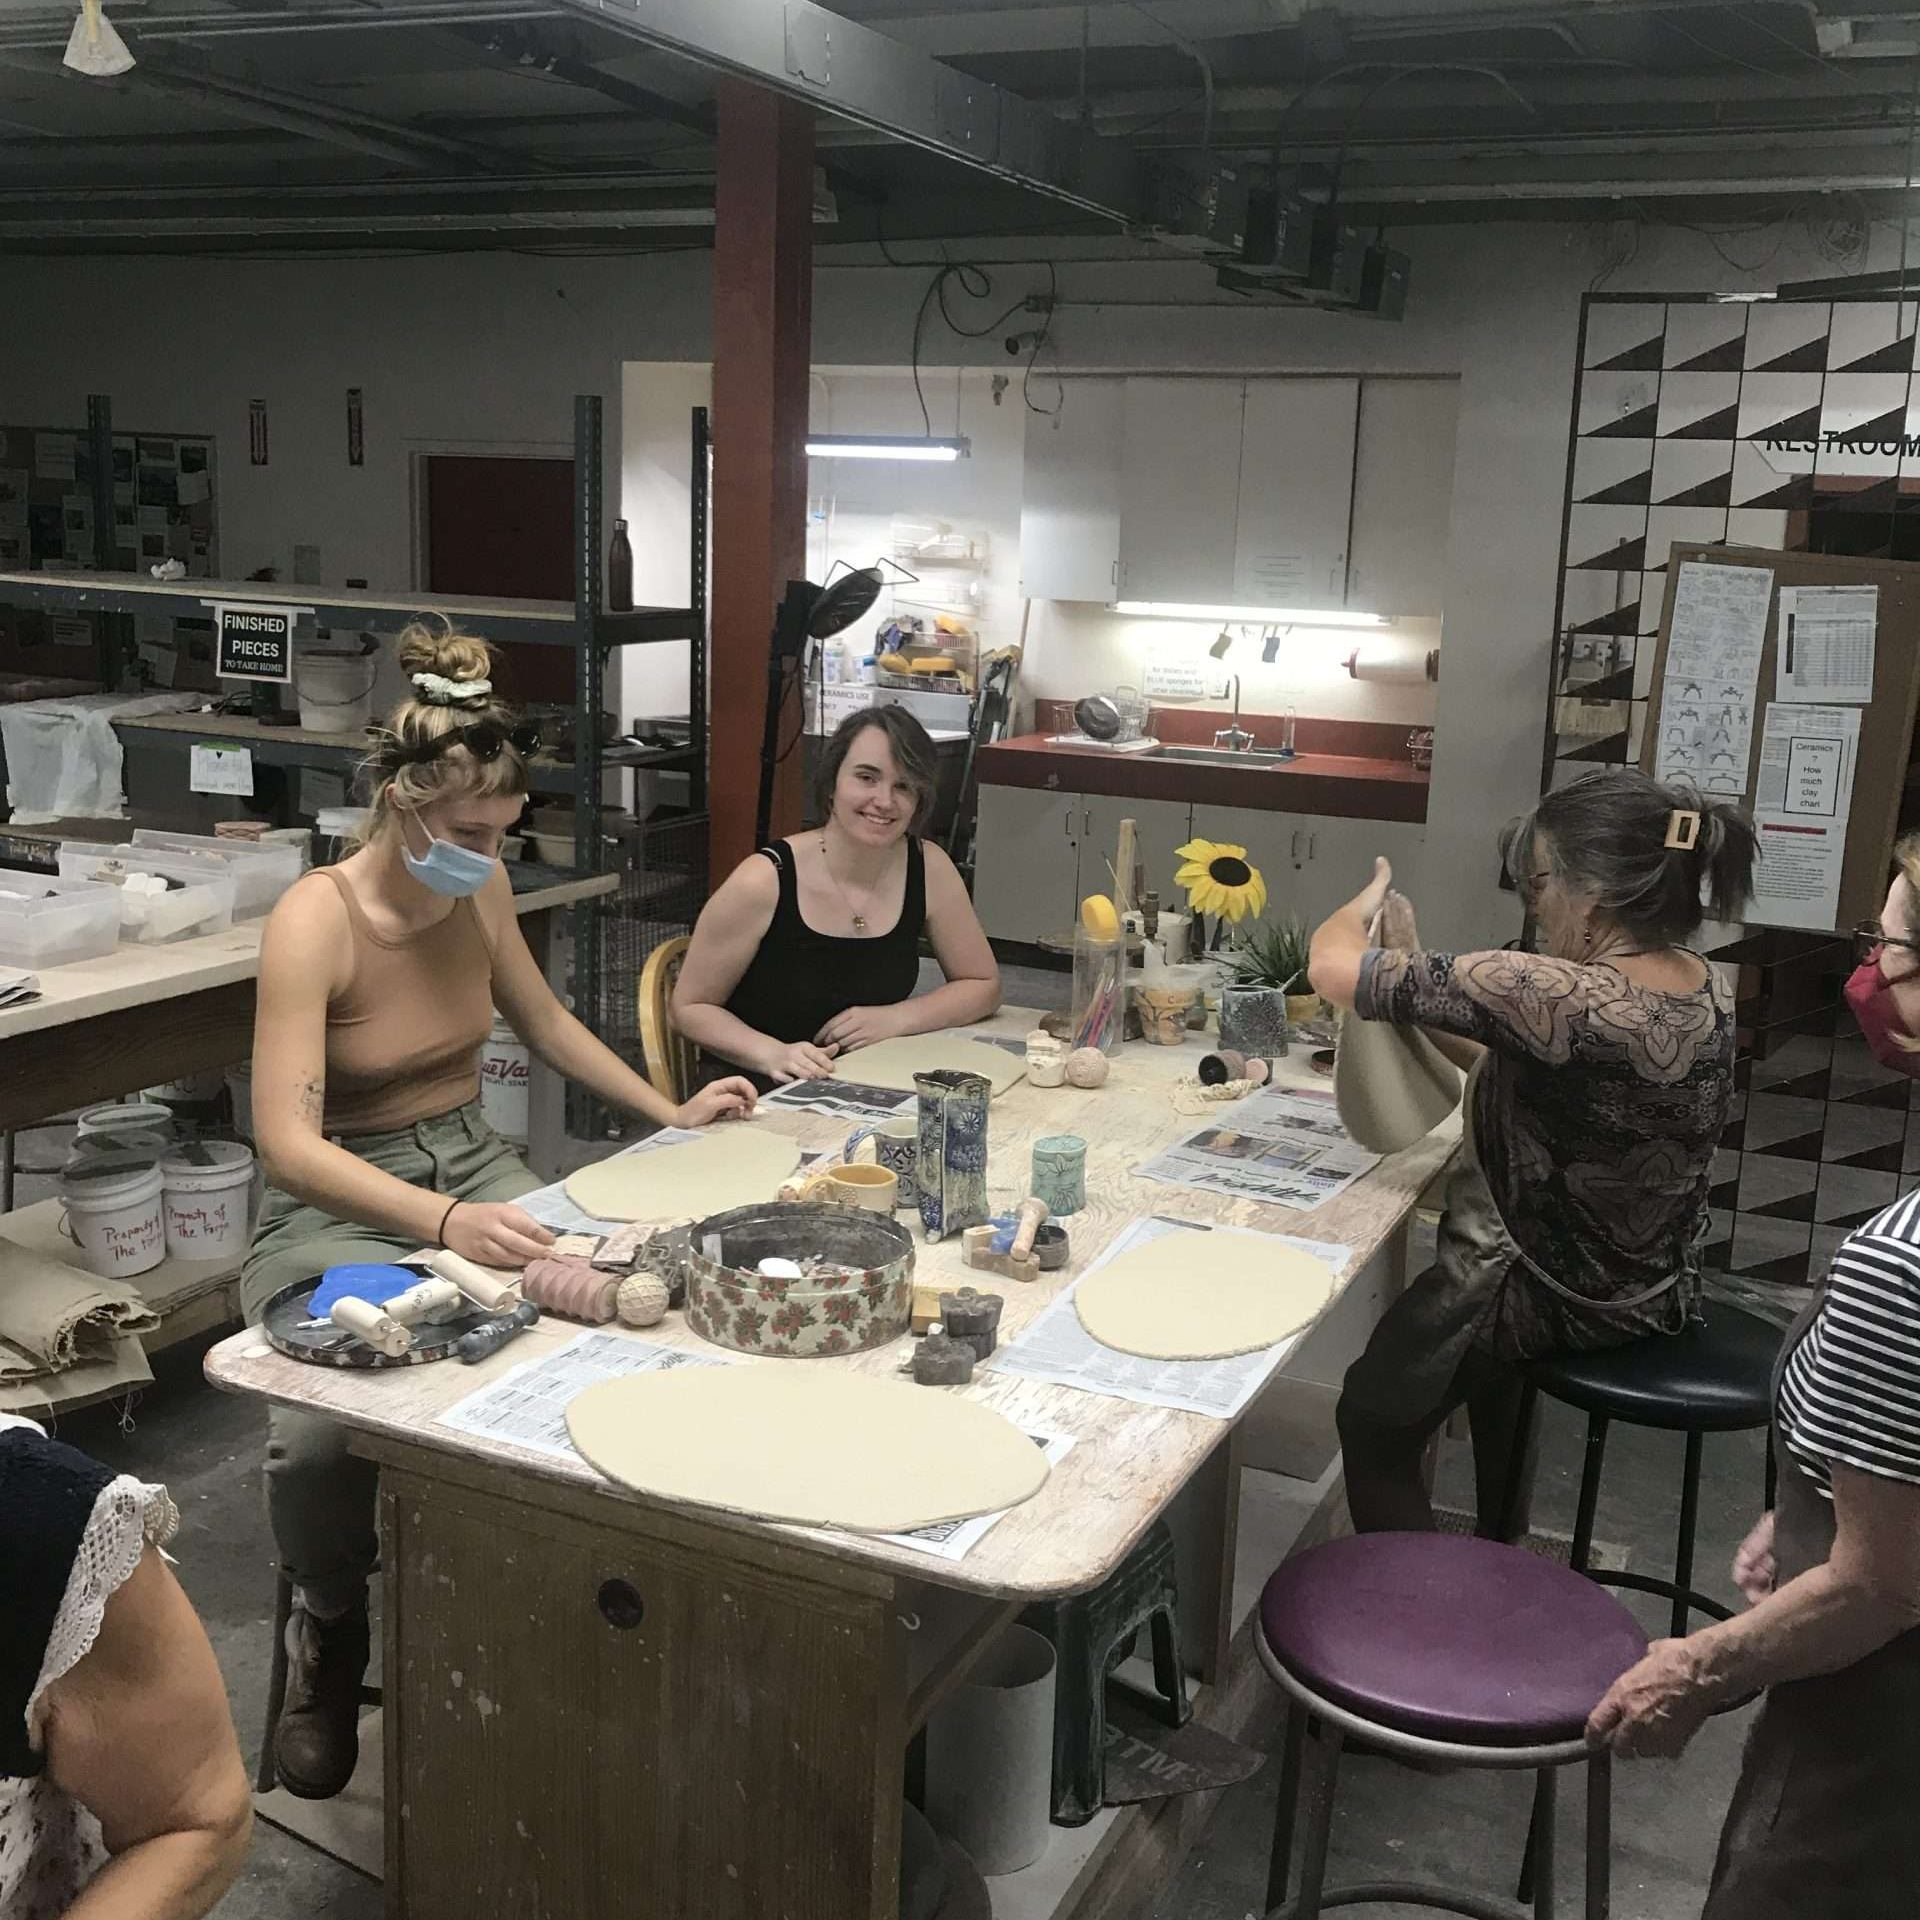 Learn the art of ceramics and the pottery wheel class